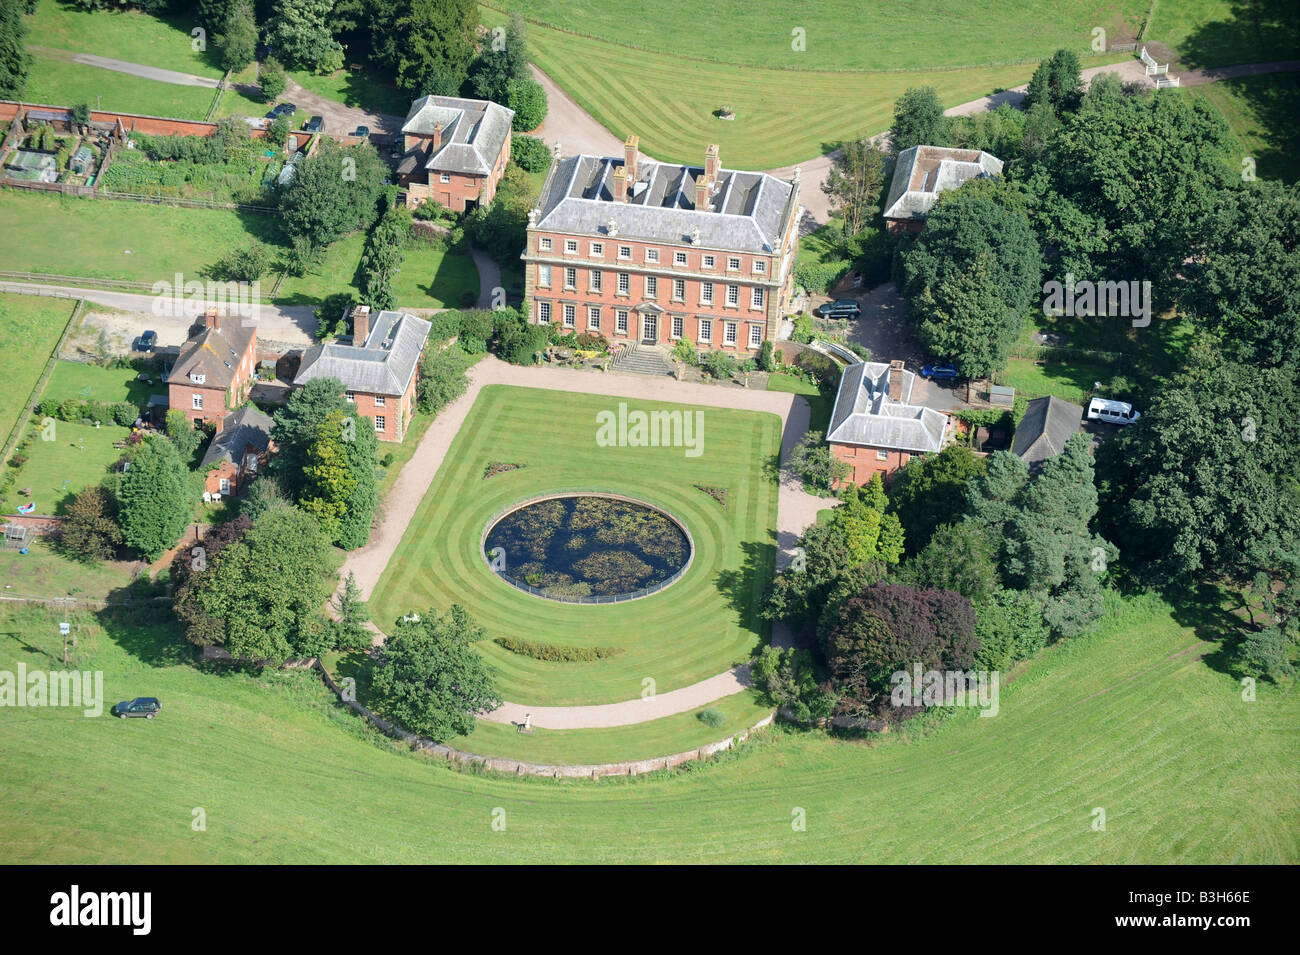 An aerial view of Davenport House at Worfield in Shropshire England Stock Photo